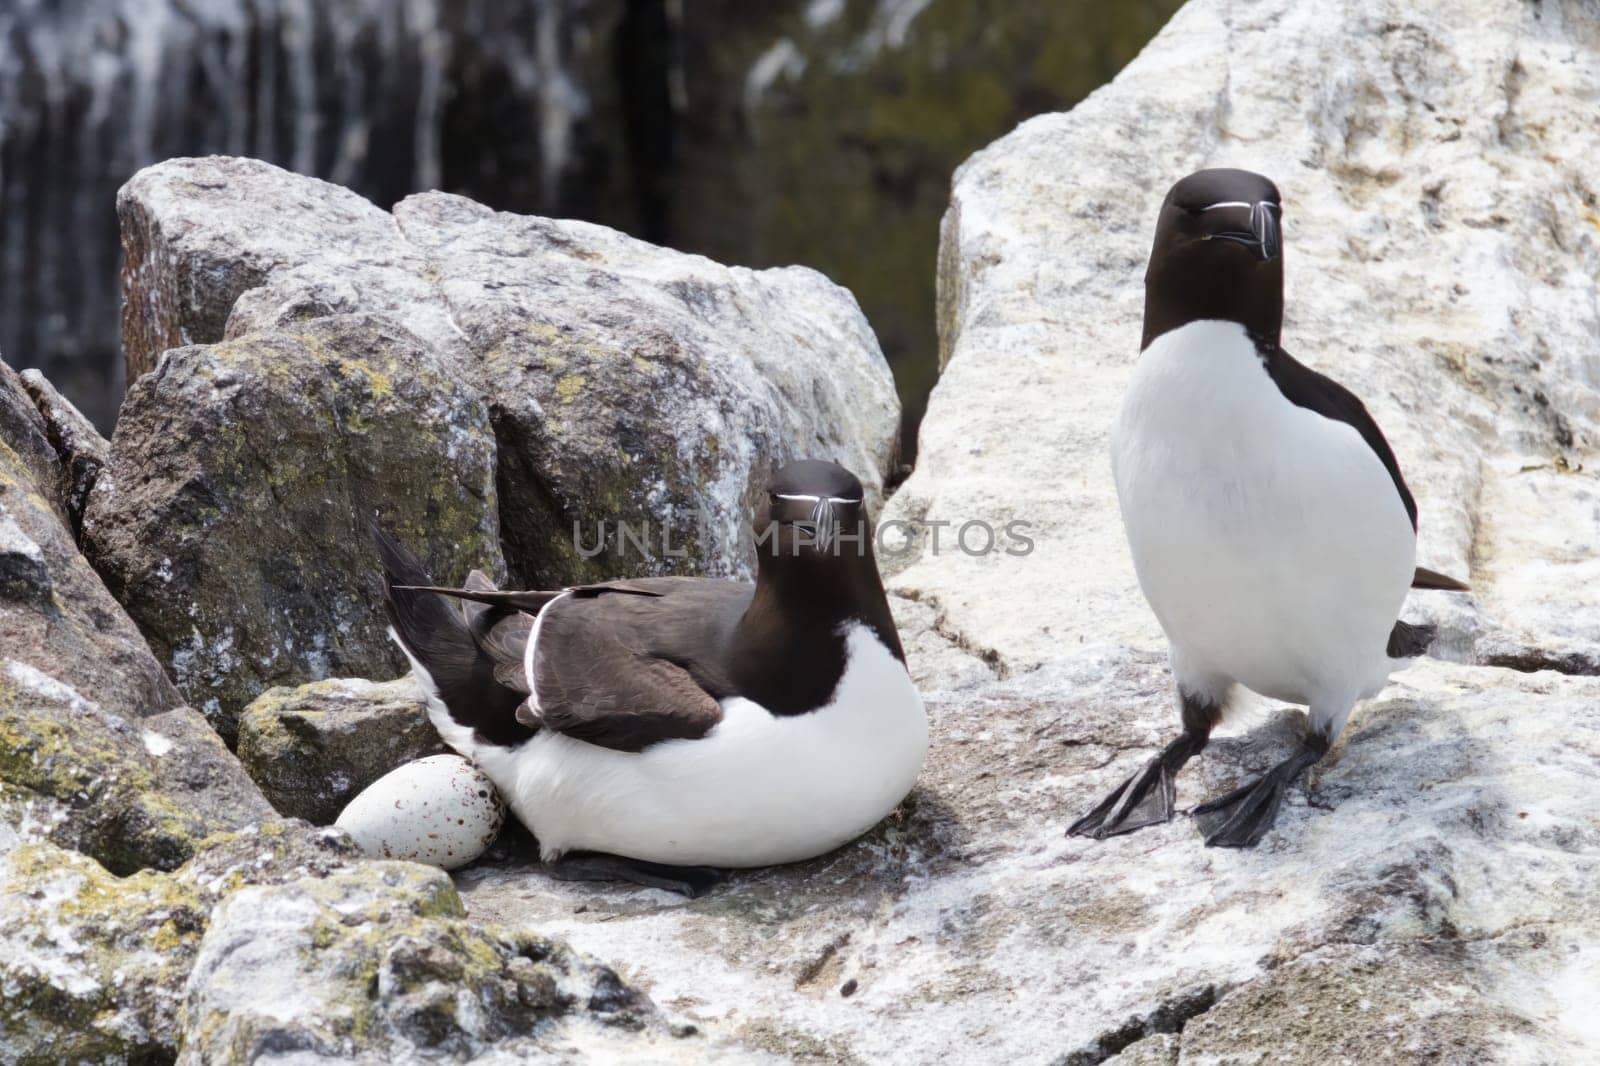 Step into a world of natural devotion with this tender photograph featuring a Razorbill couple, where the female is seen guarding an egg. This intimate moment, captured in sharp detail, allows the viewer to connect with the primal themes of love, protection, and the circle of life. The male Razorbill stands by, contributing to an atmosphere of shared responsibility and care. Set against a simple background, the couple and their soon-to-be offspring become the heartwarming focal point of the image.